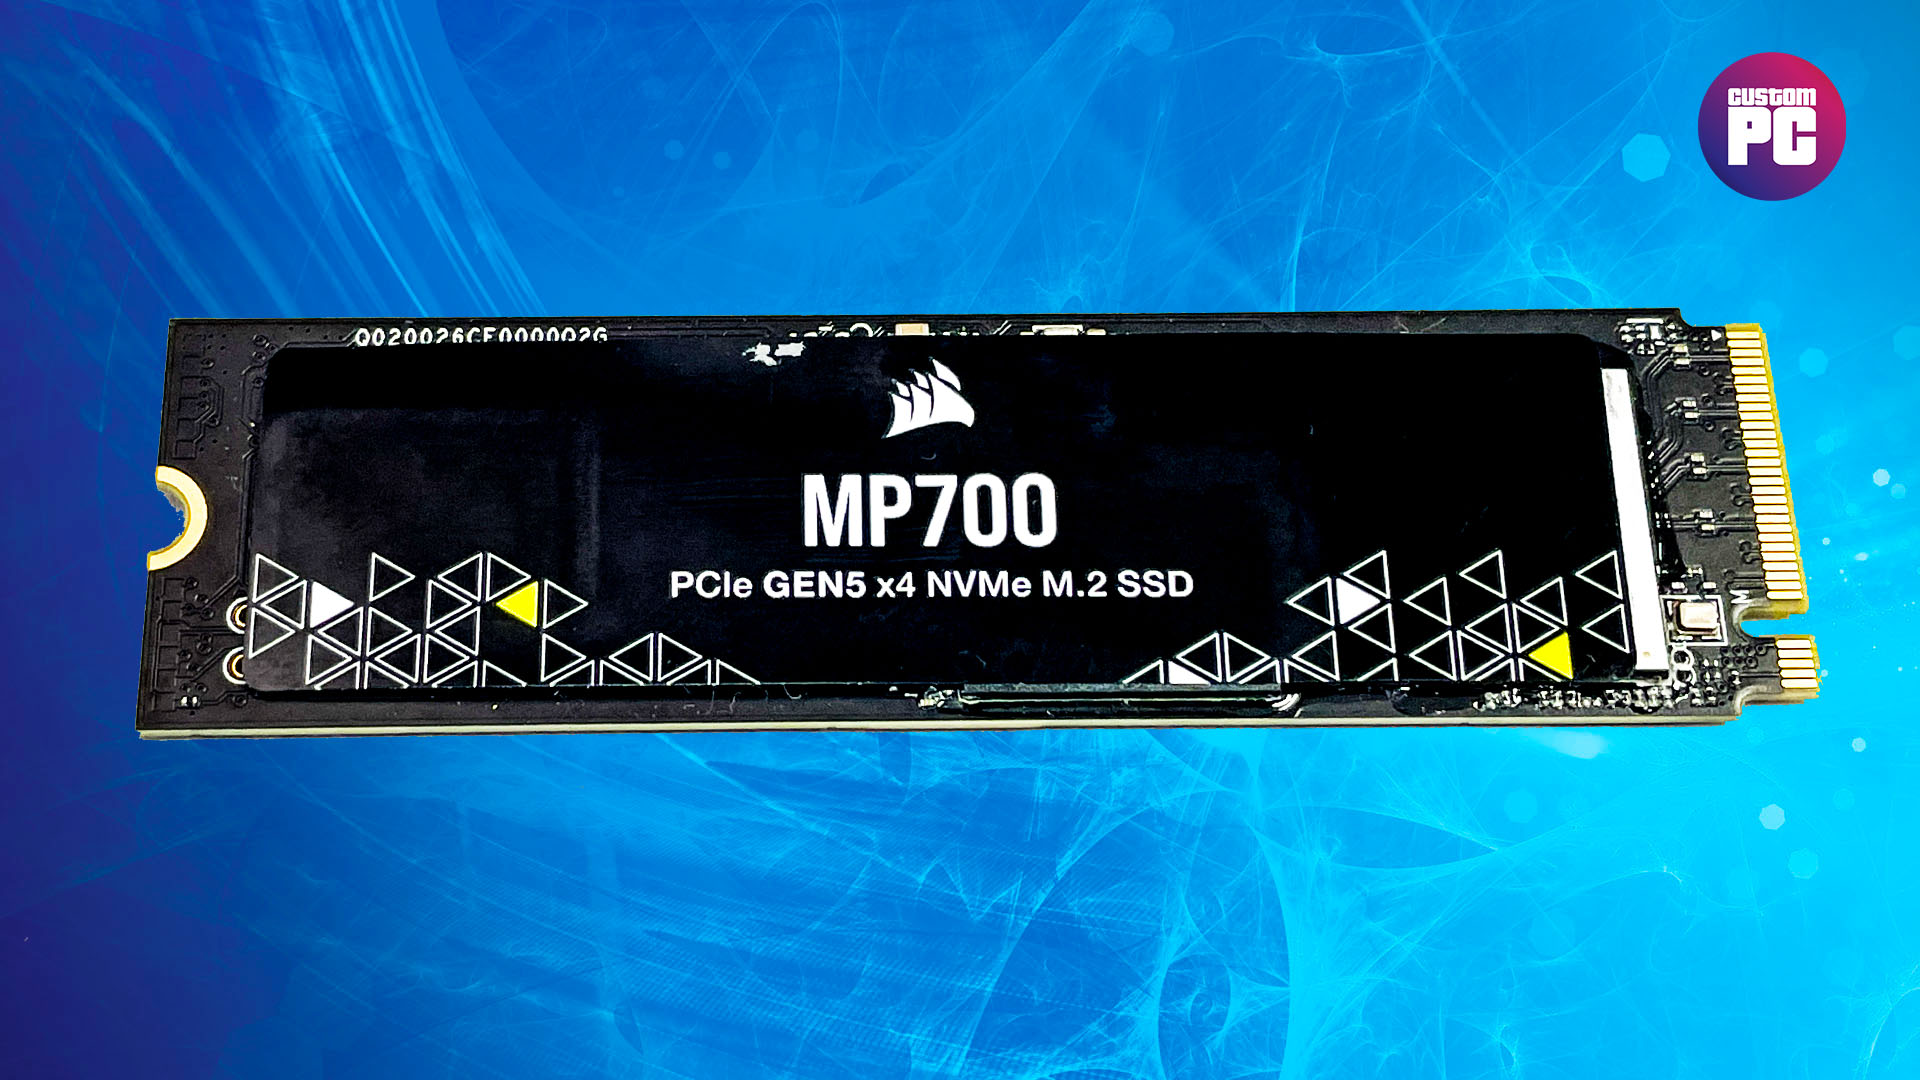 Corsair MP700 PCIe 5 SSD on a blue background